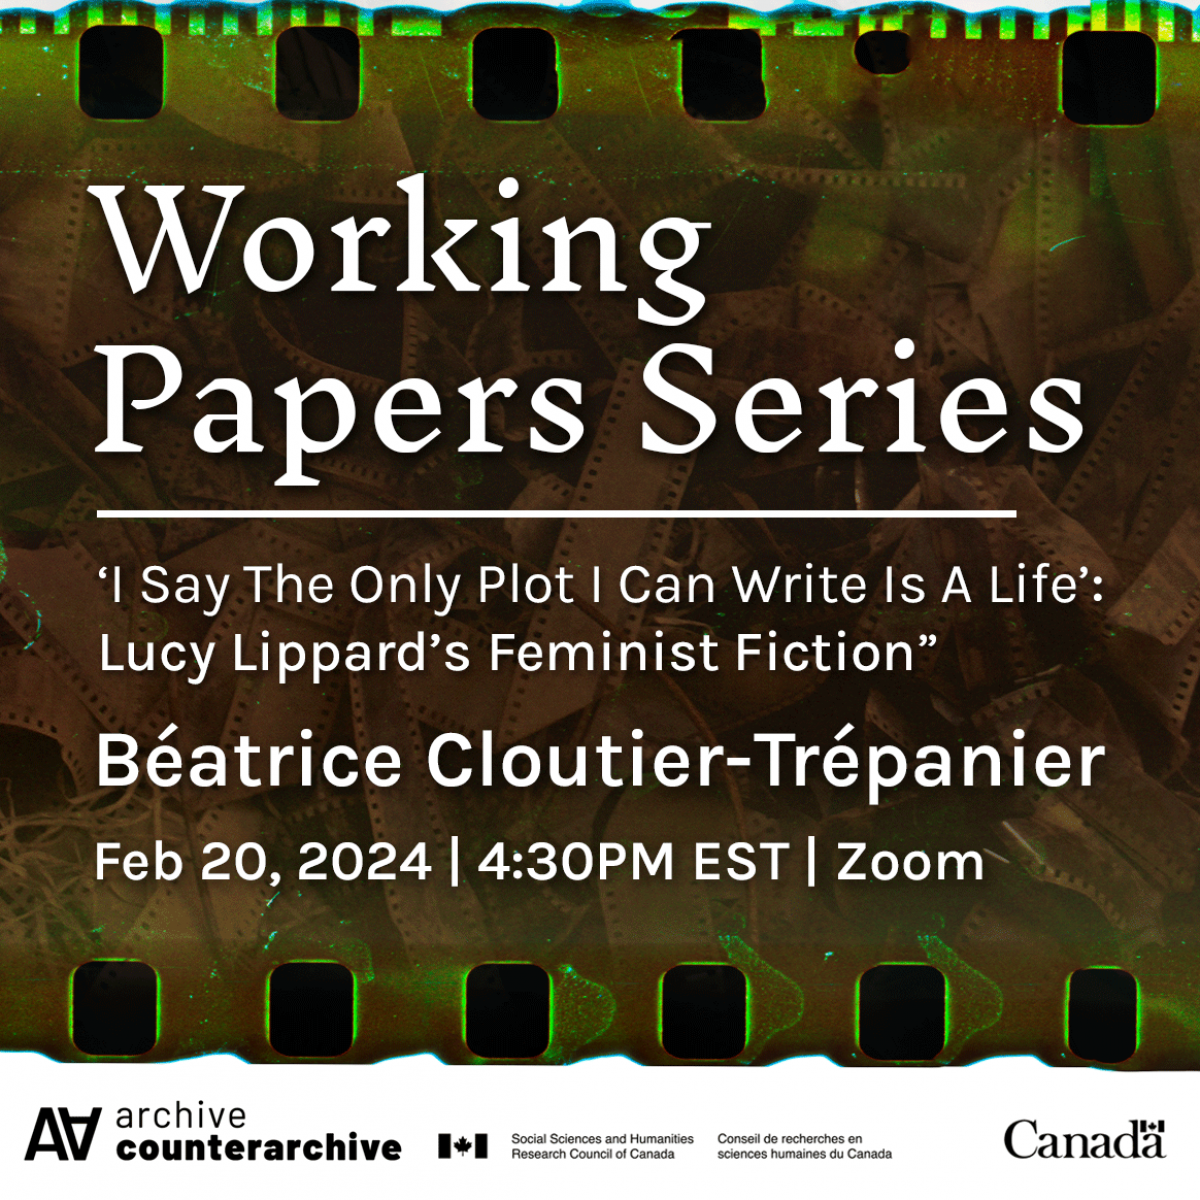 A square promotional image with the text "Working Papers Series" written in large angular font with the text "‘I Say The Only Plot I Can Write Is A Life’: Lucy Lippard’s Feminist Fiction. Feb 20, 2024, 4:30 pm EST, Zoom " written underneath.